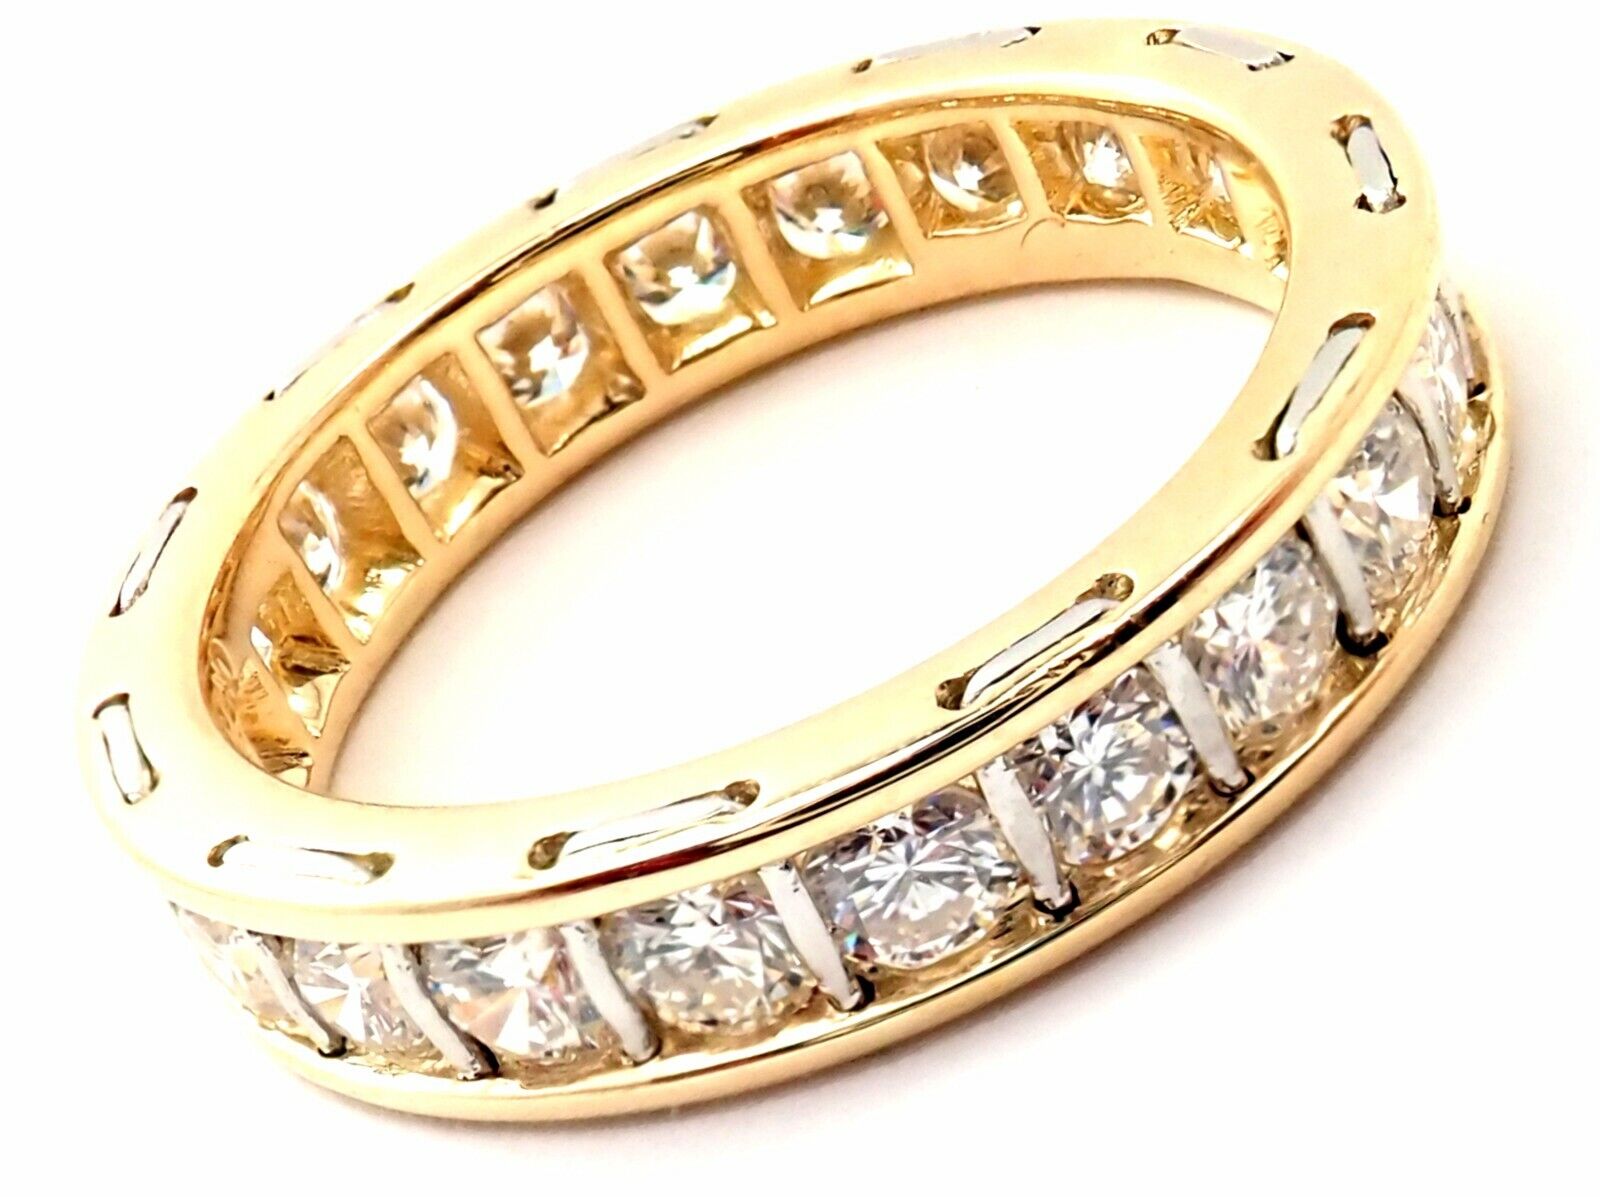 Cartier Jewelry & Watches:Fine Jewelry:Rings Rare! Vintage Authentic Cartier 18k Yellow Gold Diamond Eternity Band Stack Ring